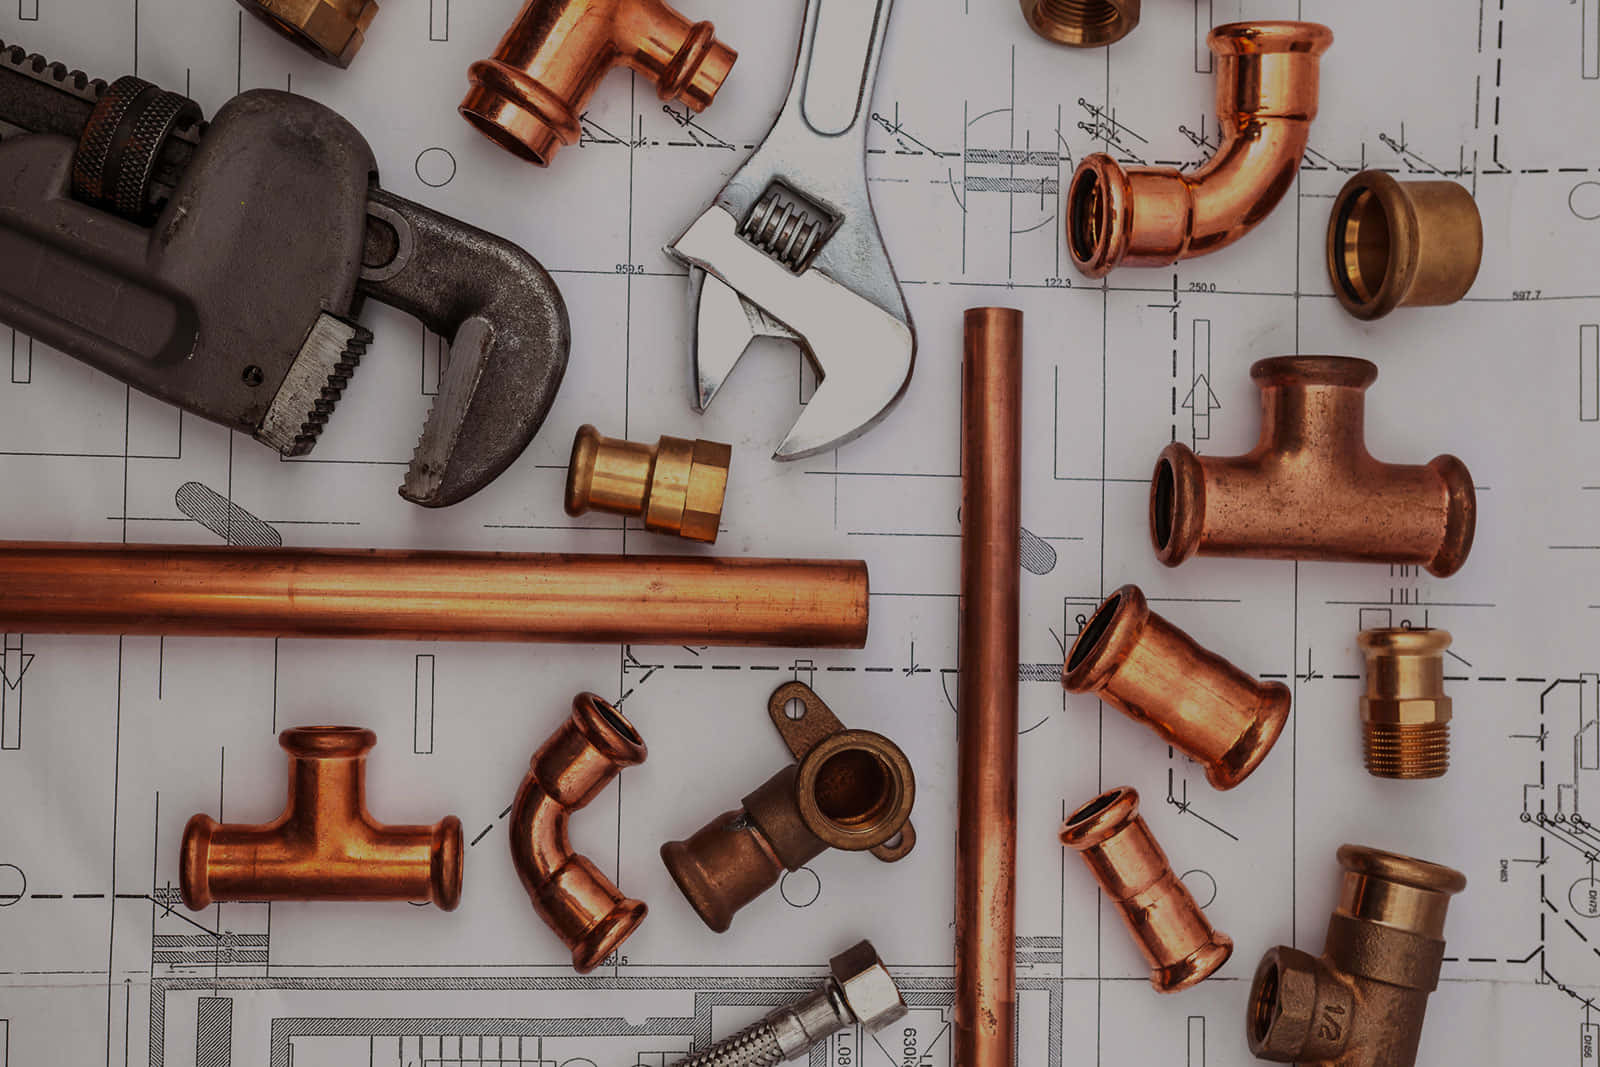 Copper Plumbing Tools And Fittings On Plan Wallpaper